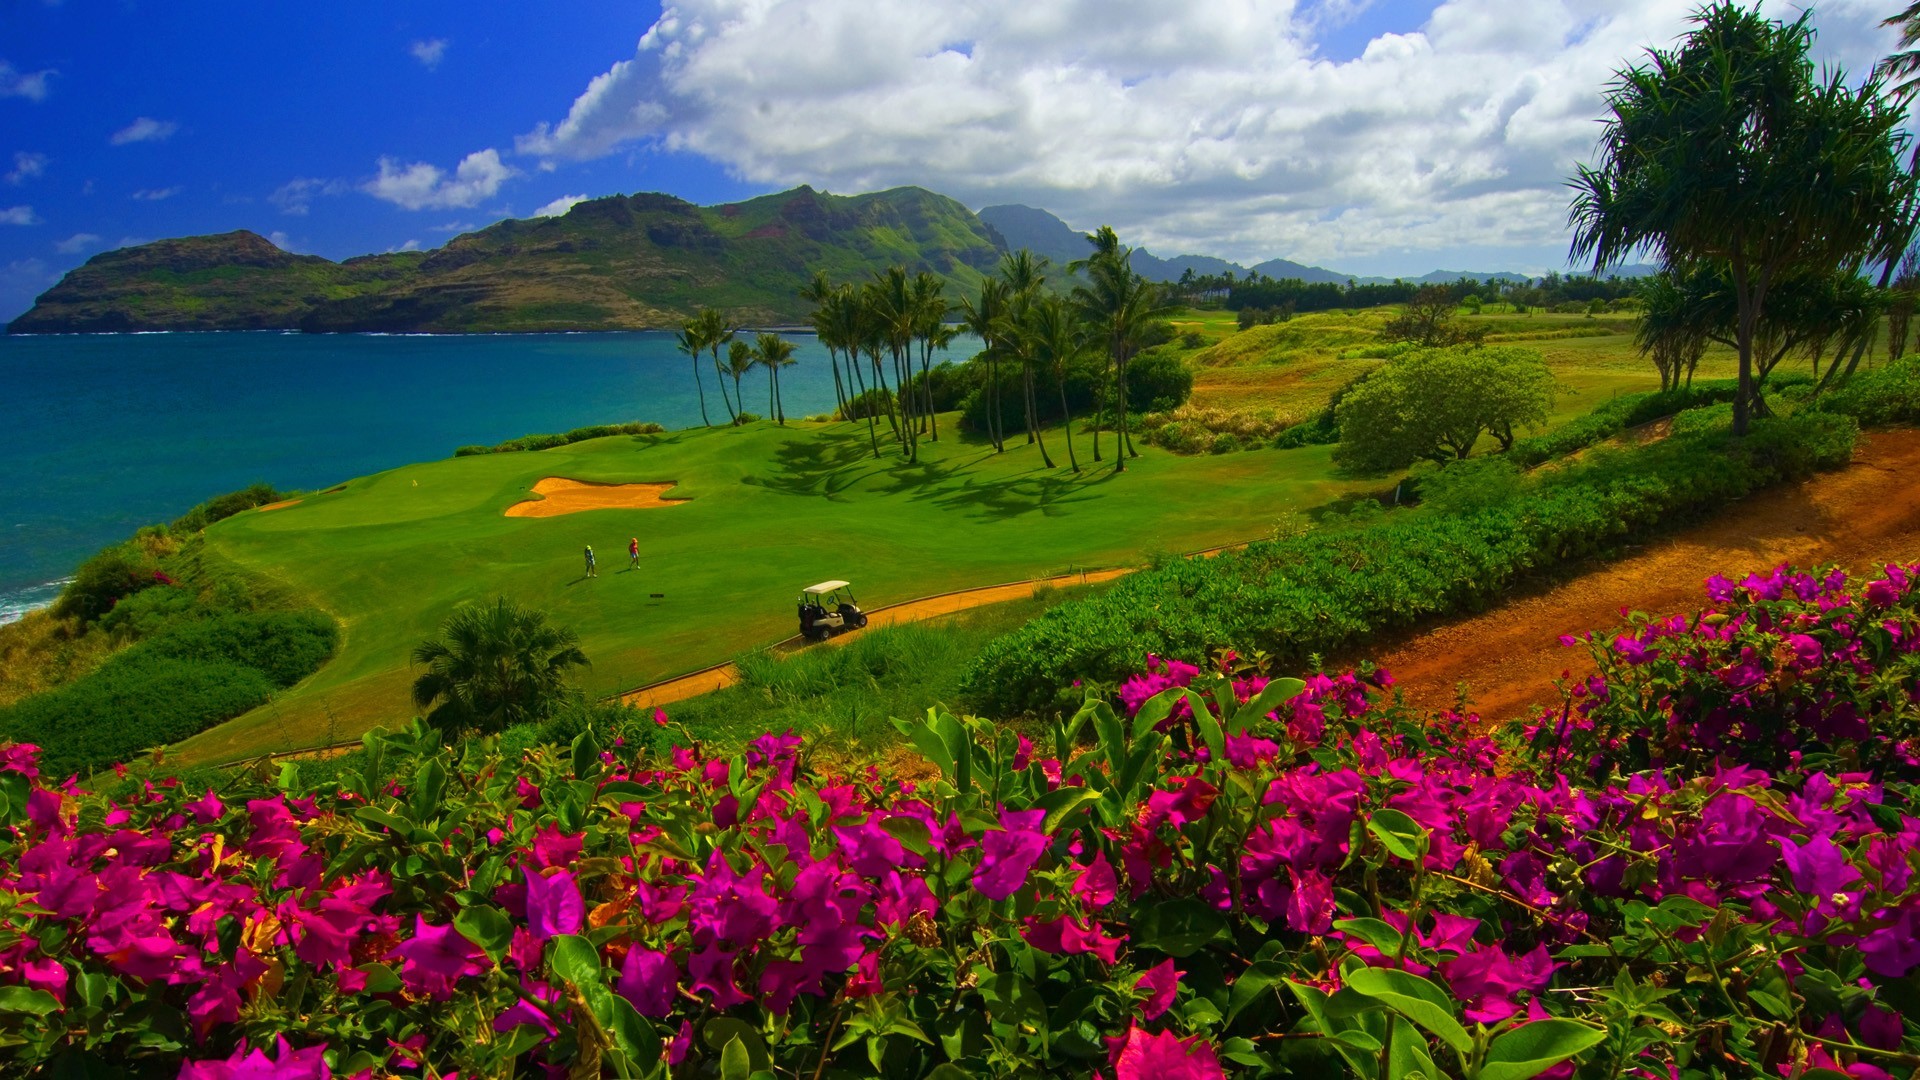 Nature Landscape Water Trees Sea Hawaii Golf Course Flowers Grass Sand Palm Trees Mountains Hills Cl 1920x1080